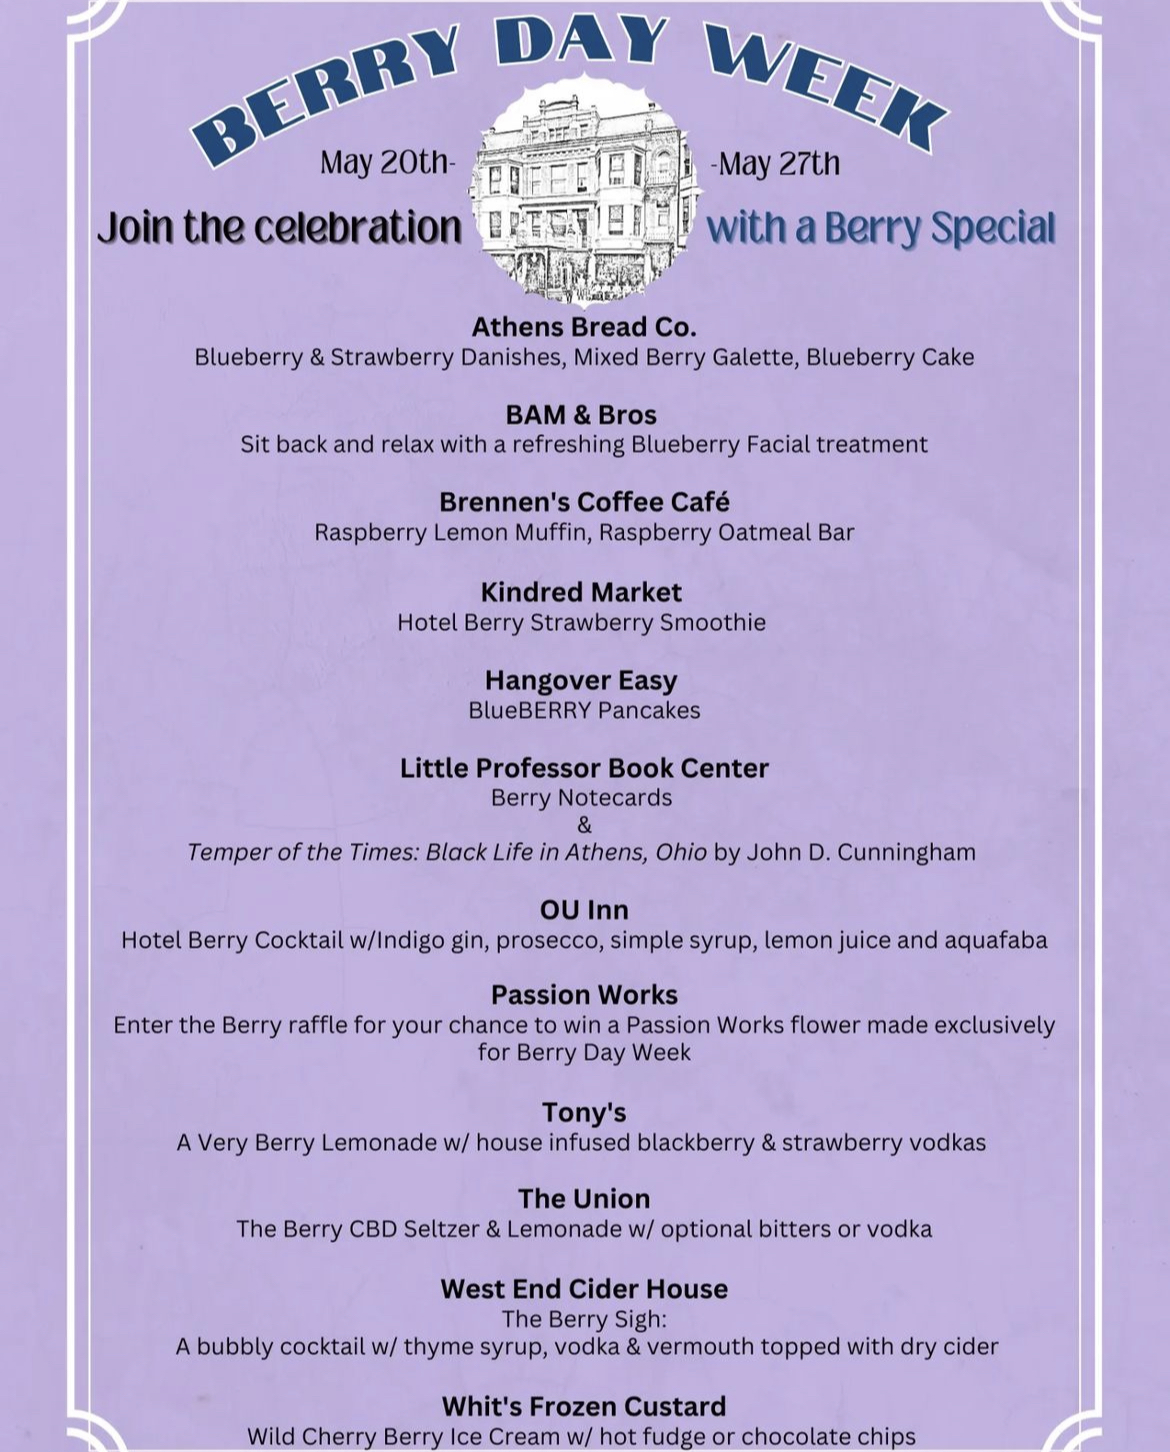 A flyer lists all the local Athens businesses that participated in specials for "Berry Day Week."